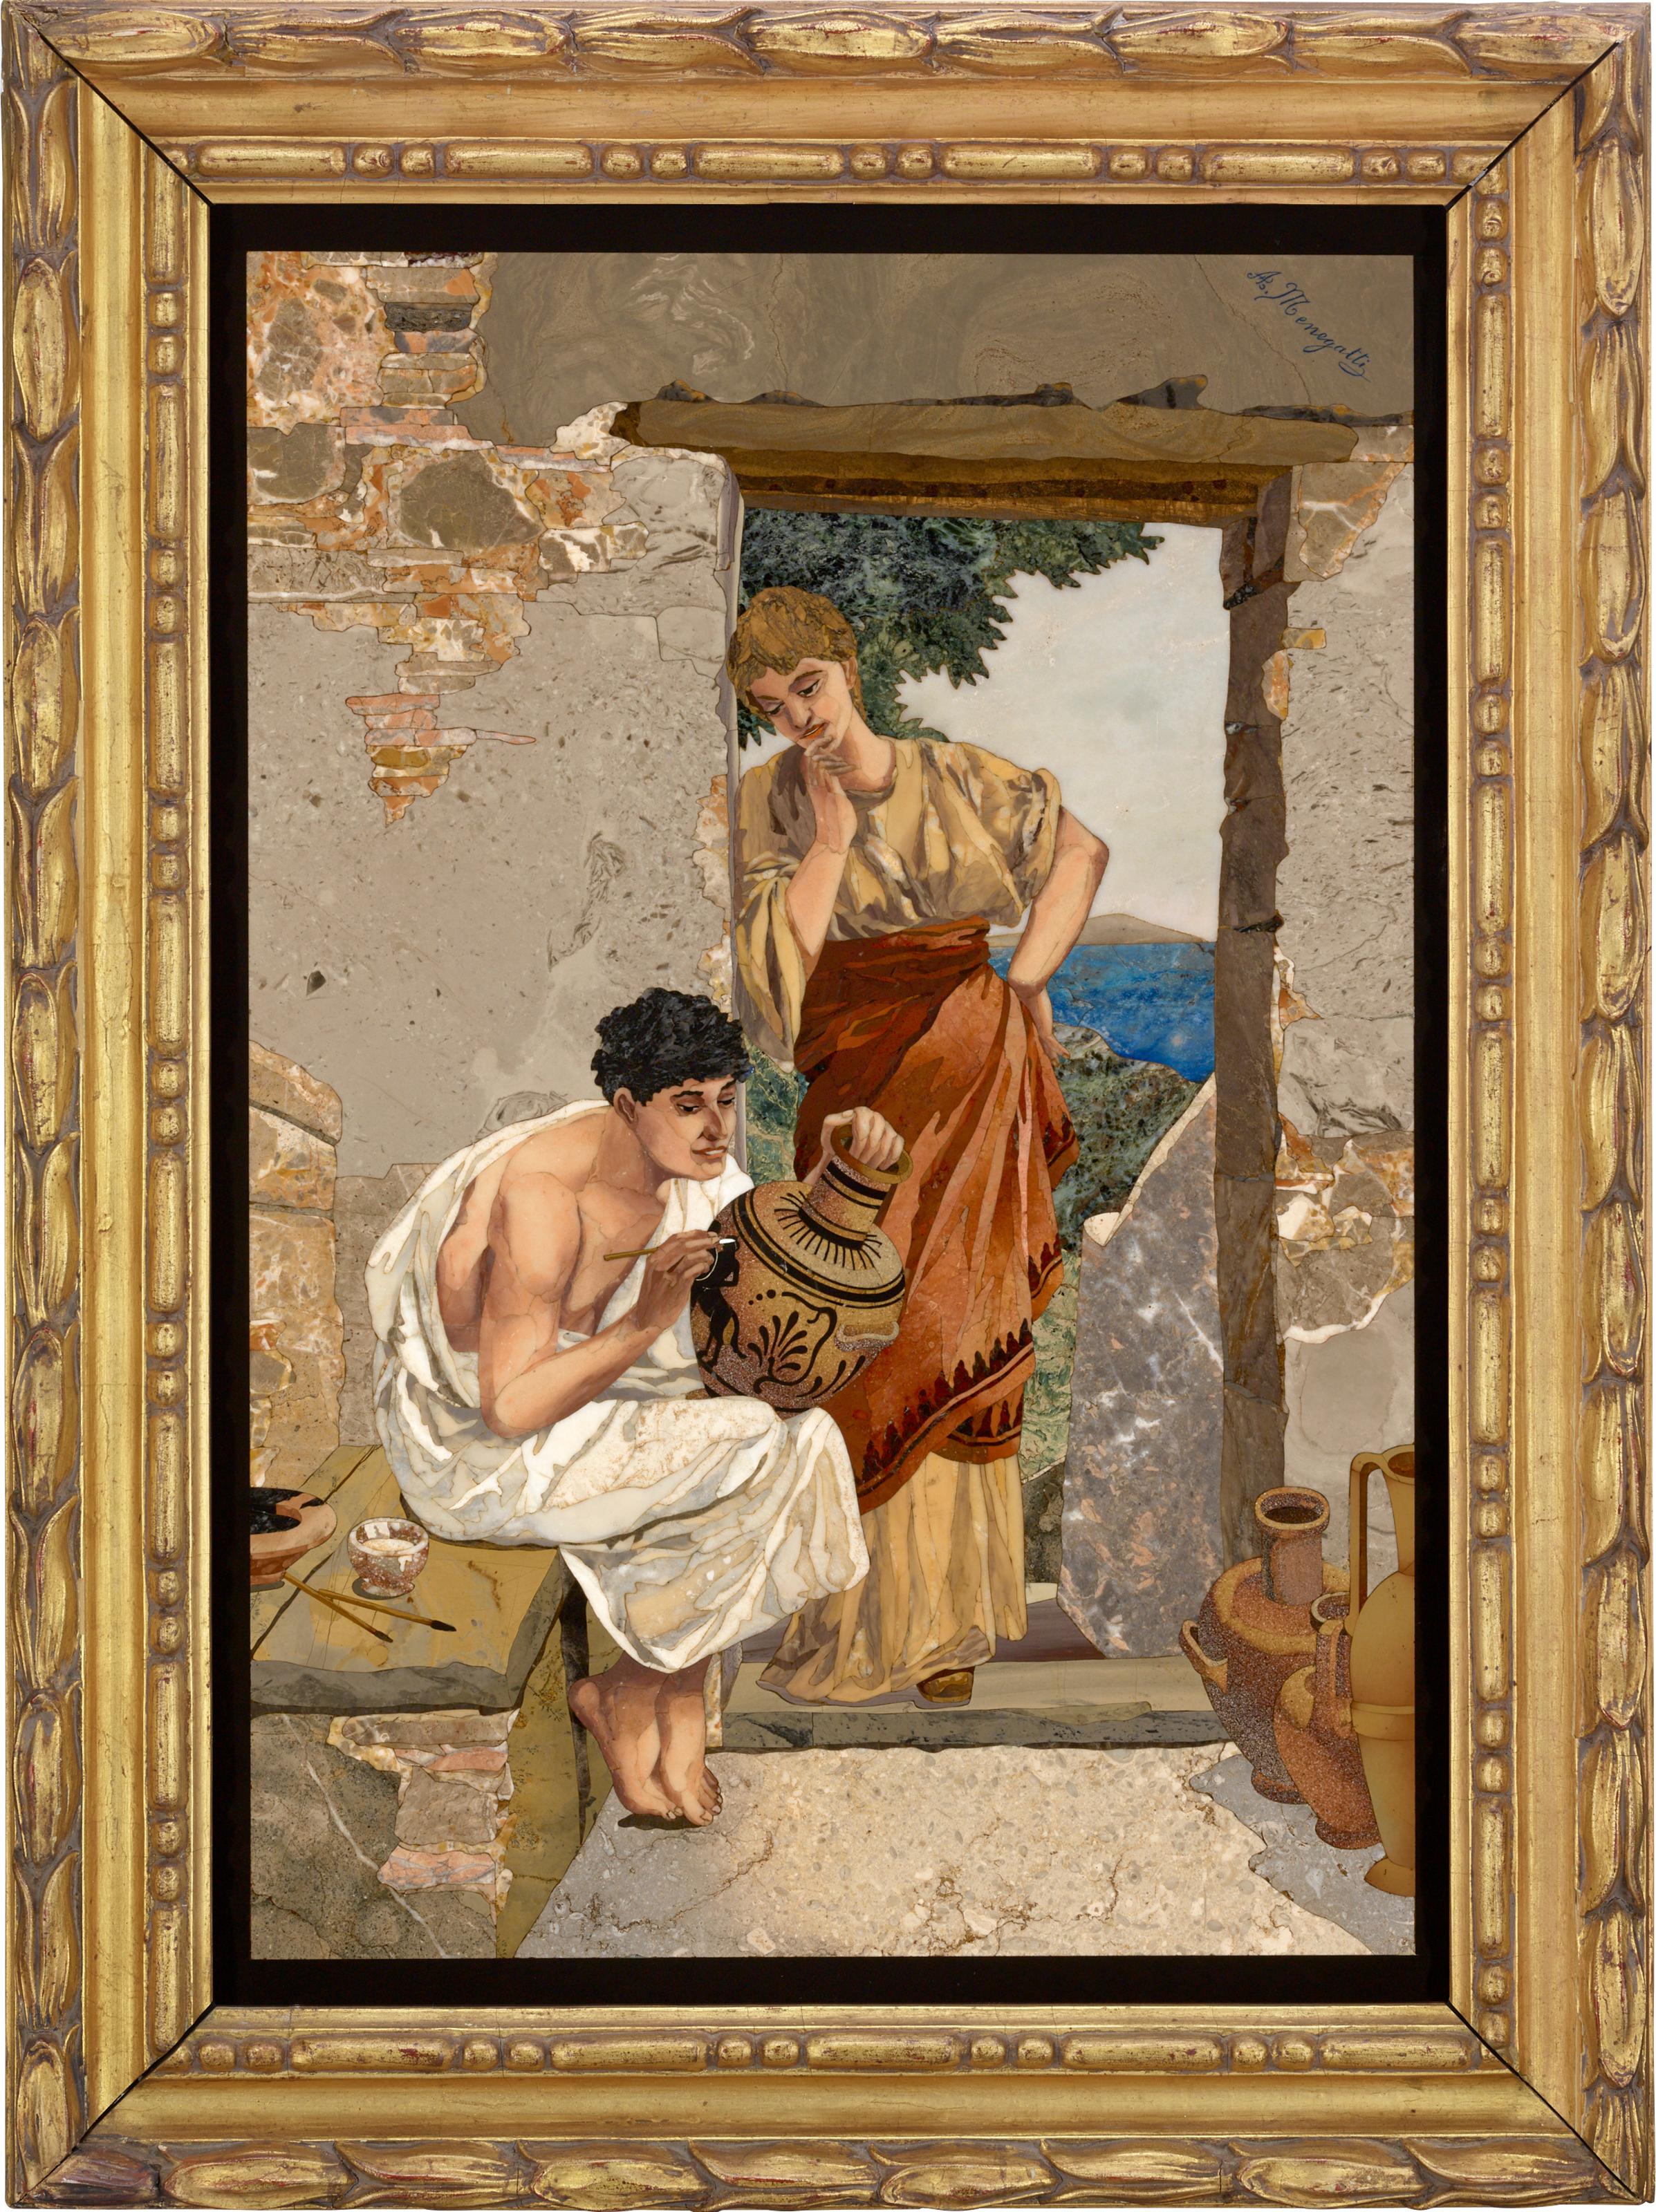 A young man clad in classical robes paints an amphora vase as an attractive admirer observes him in this magnificent pietre dure plaque by Florentine artisan Alberto Menegatti. The work is emblematic of the charming scenes of rural life that were